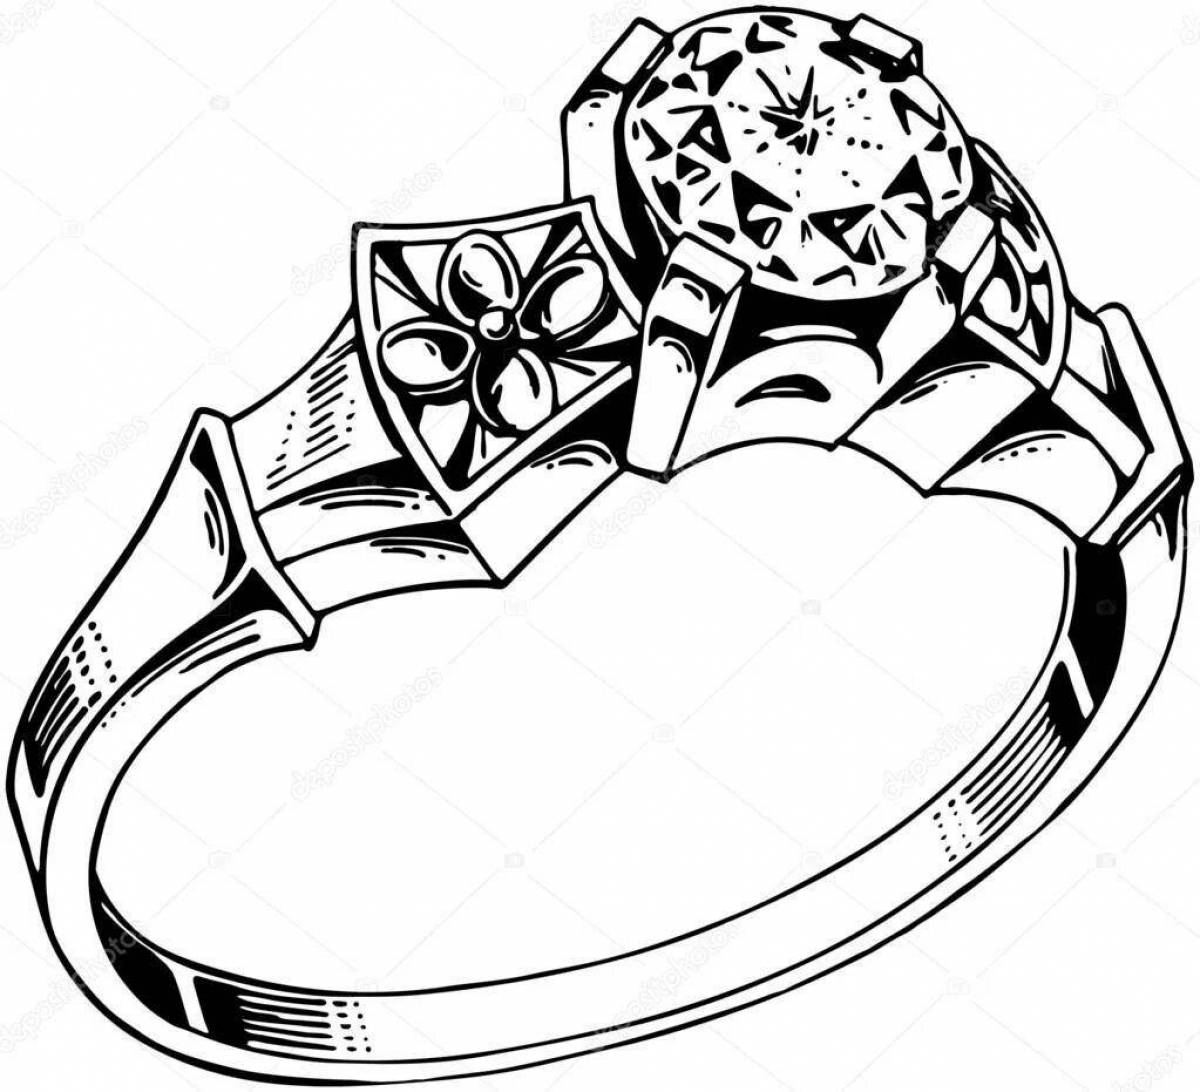 Violent stone ring coloring page